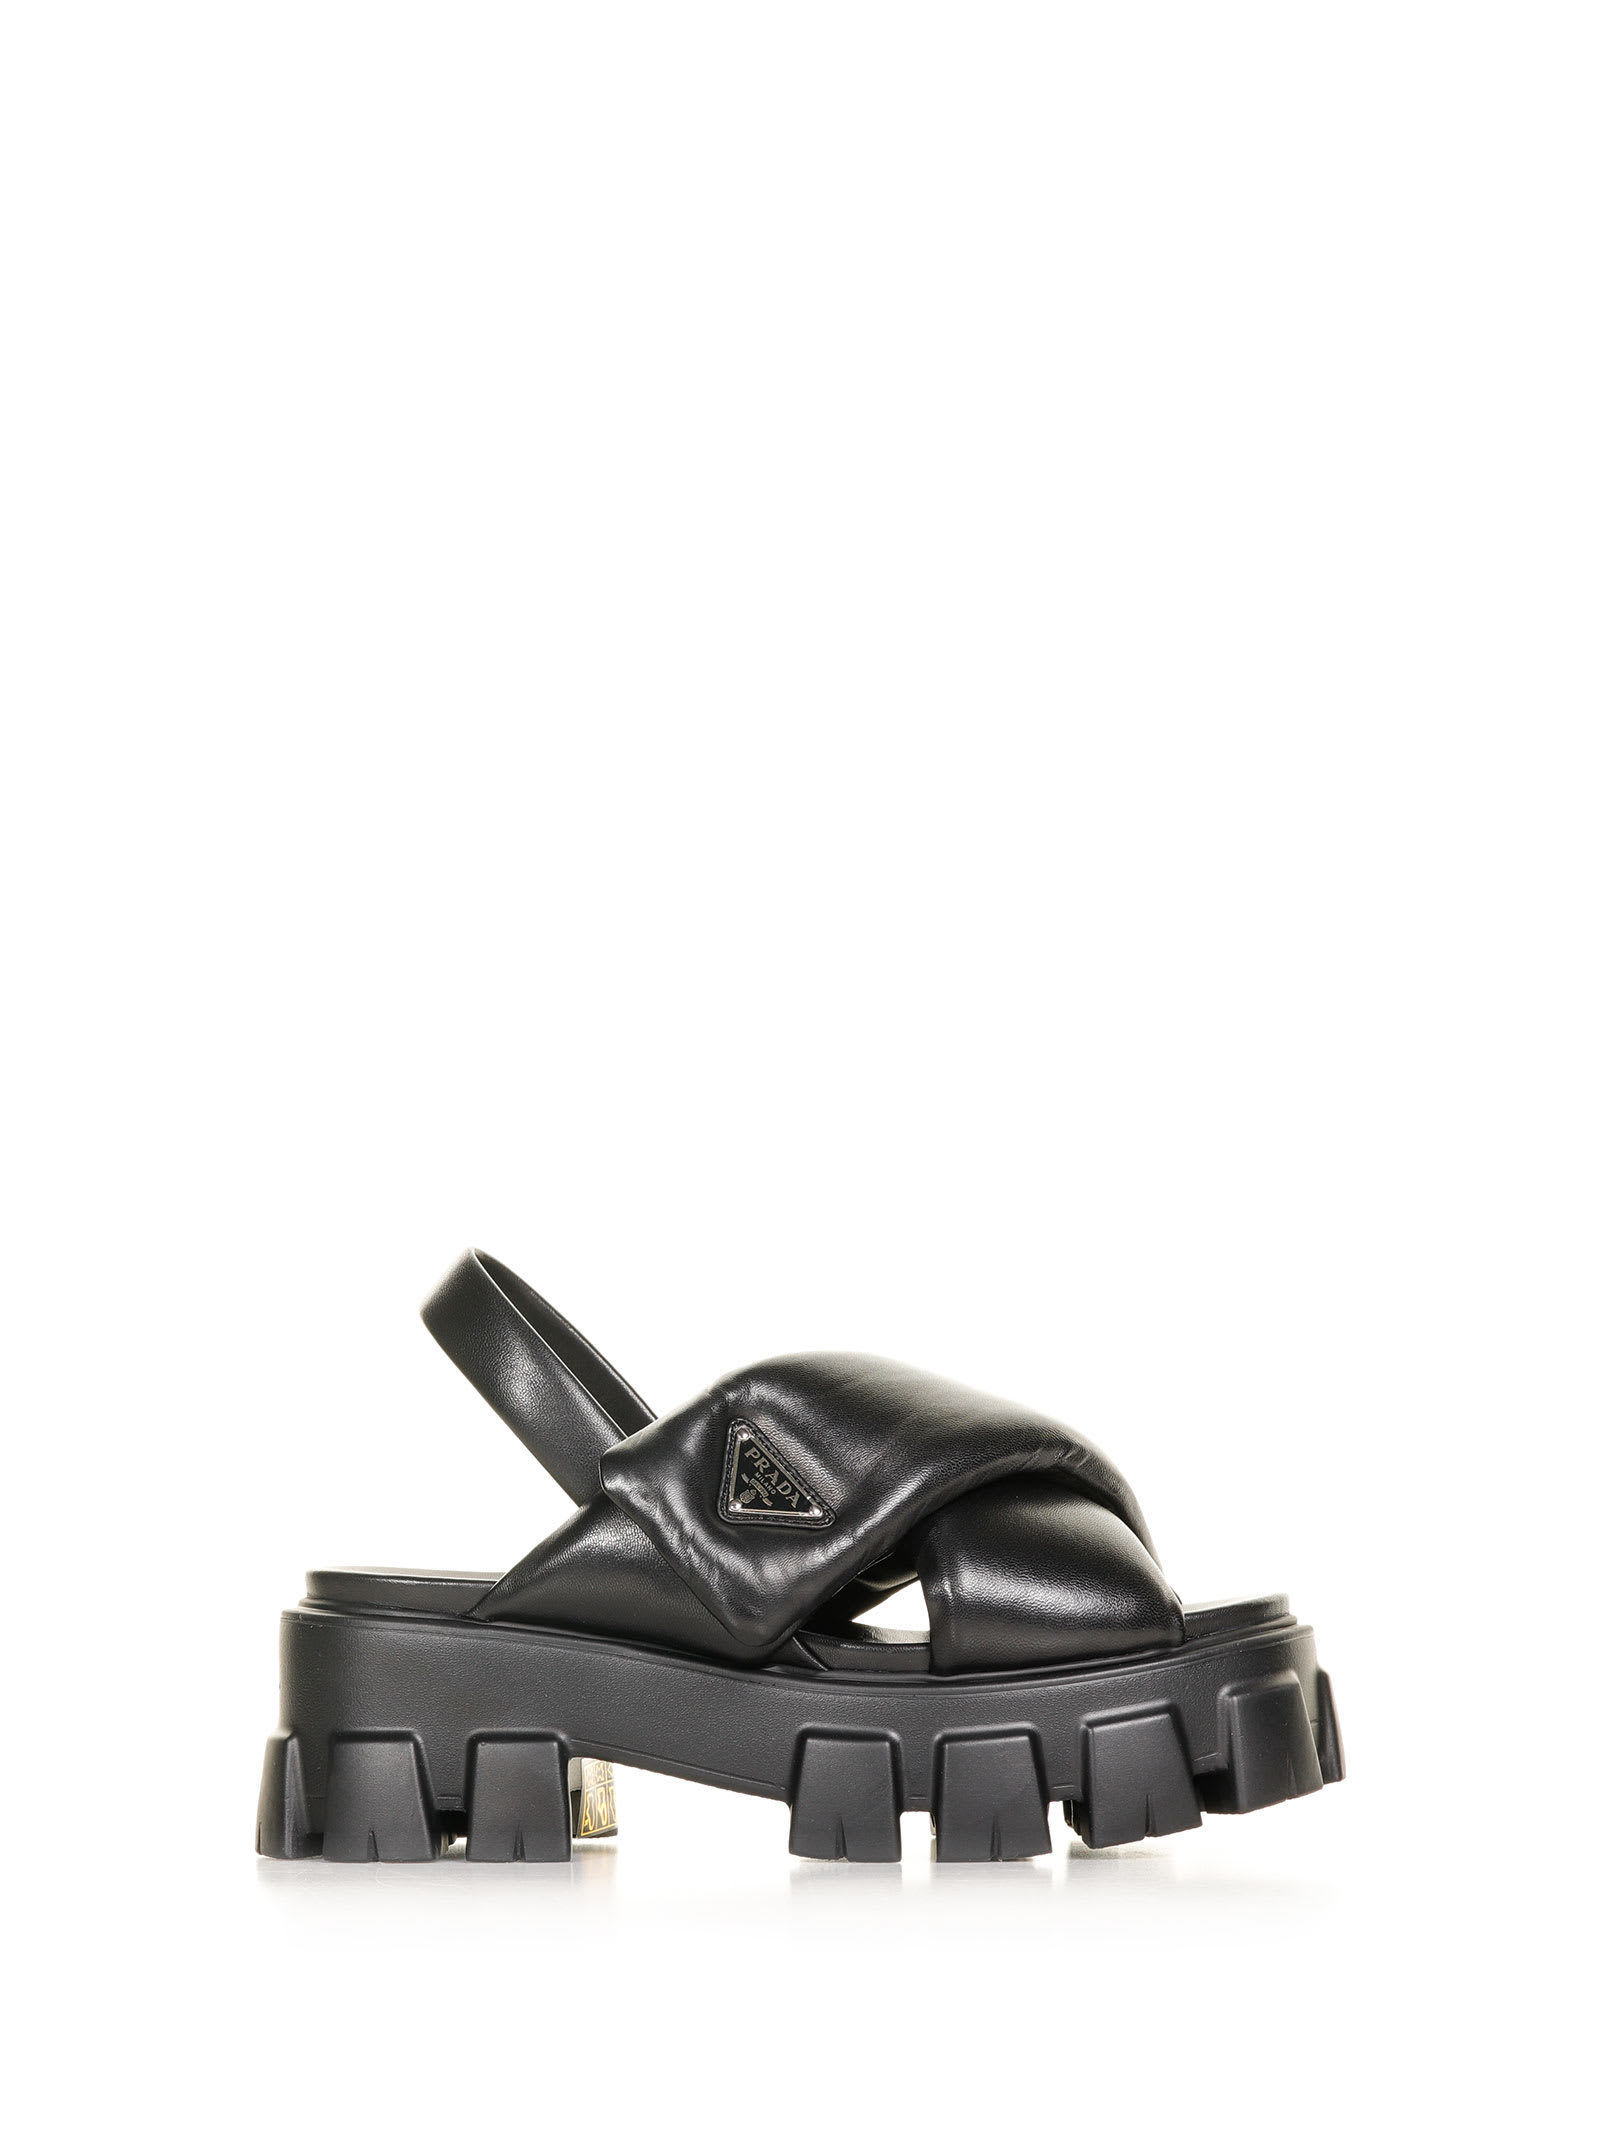 PRADA MONOLITH SANDALS IN PADDED NAPPA LEATHER